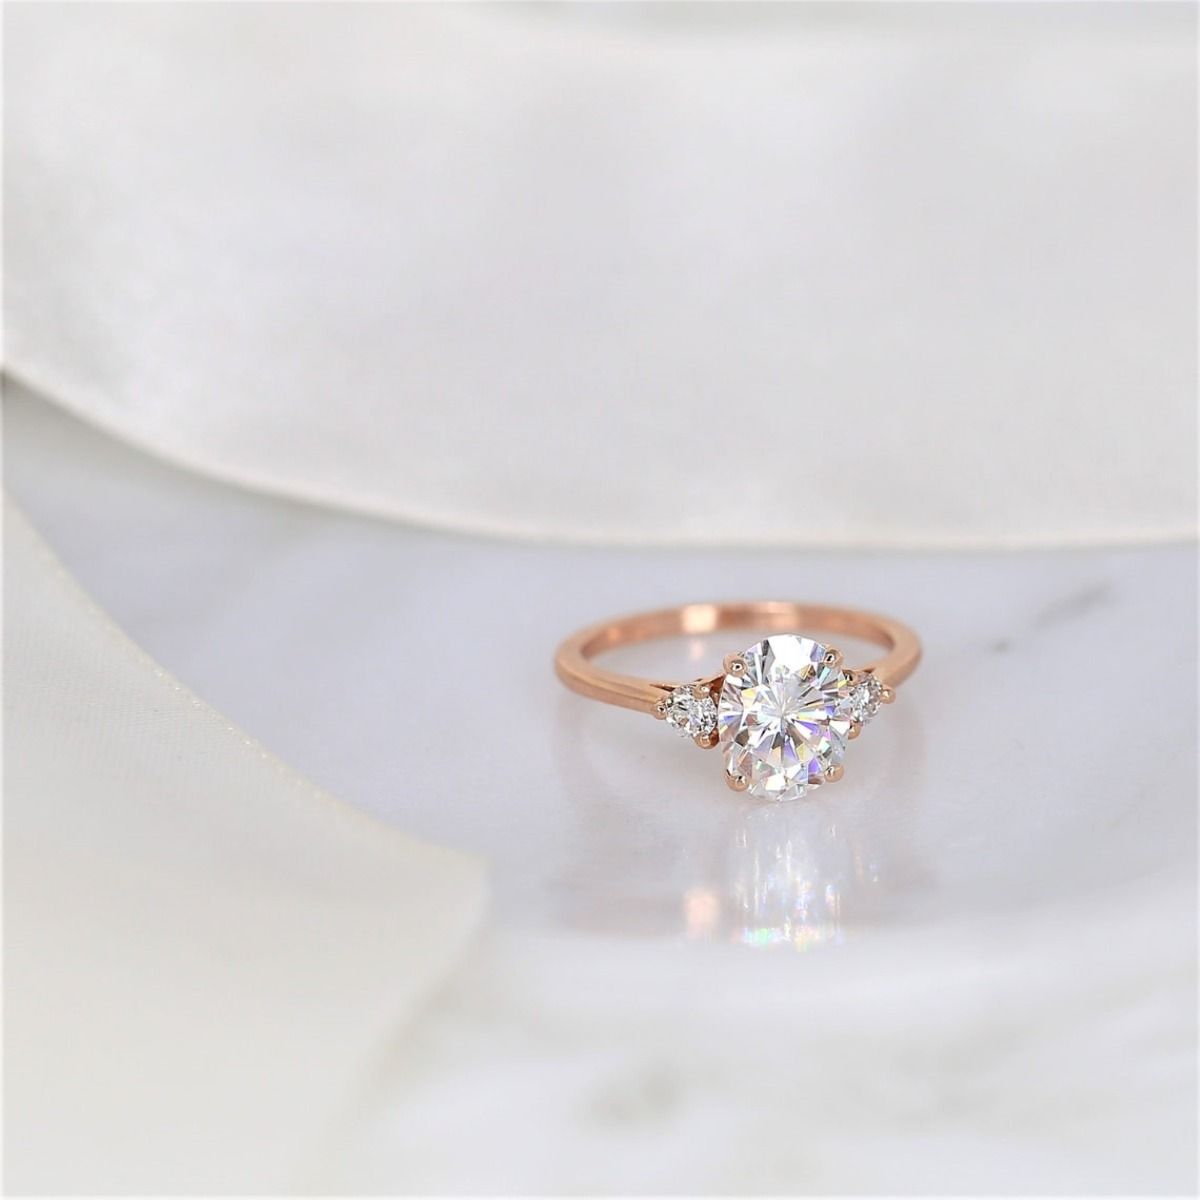 2ct Gloria 9x7mm 14kt Rose Gold Oval Moissanite and Diamonds Three Stone Ring by Rosados Box 